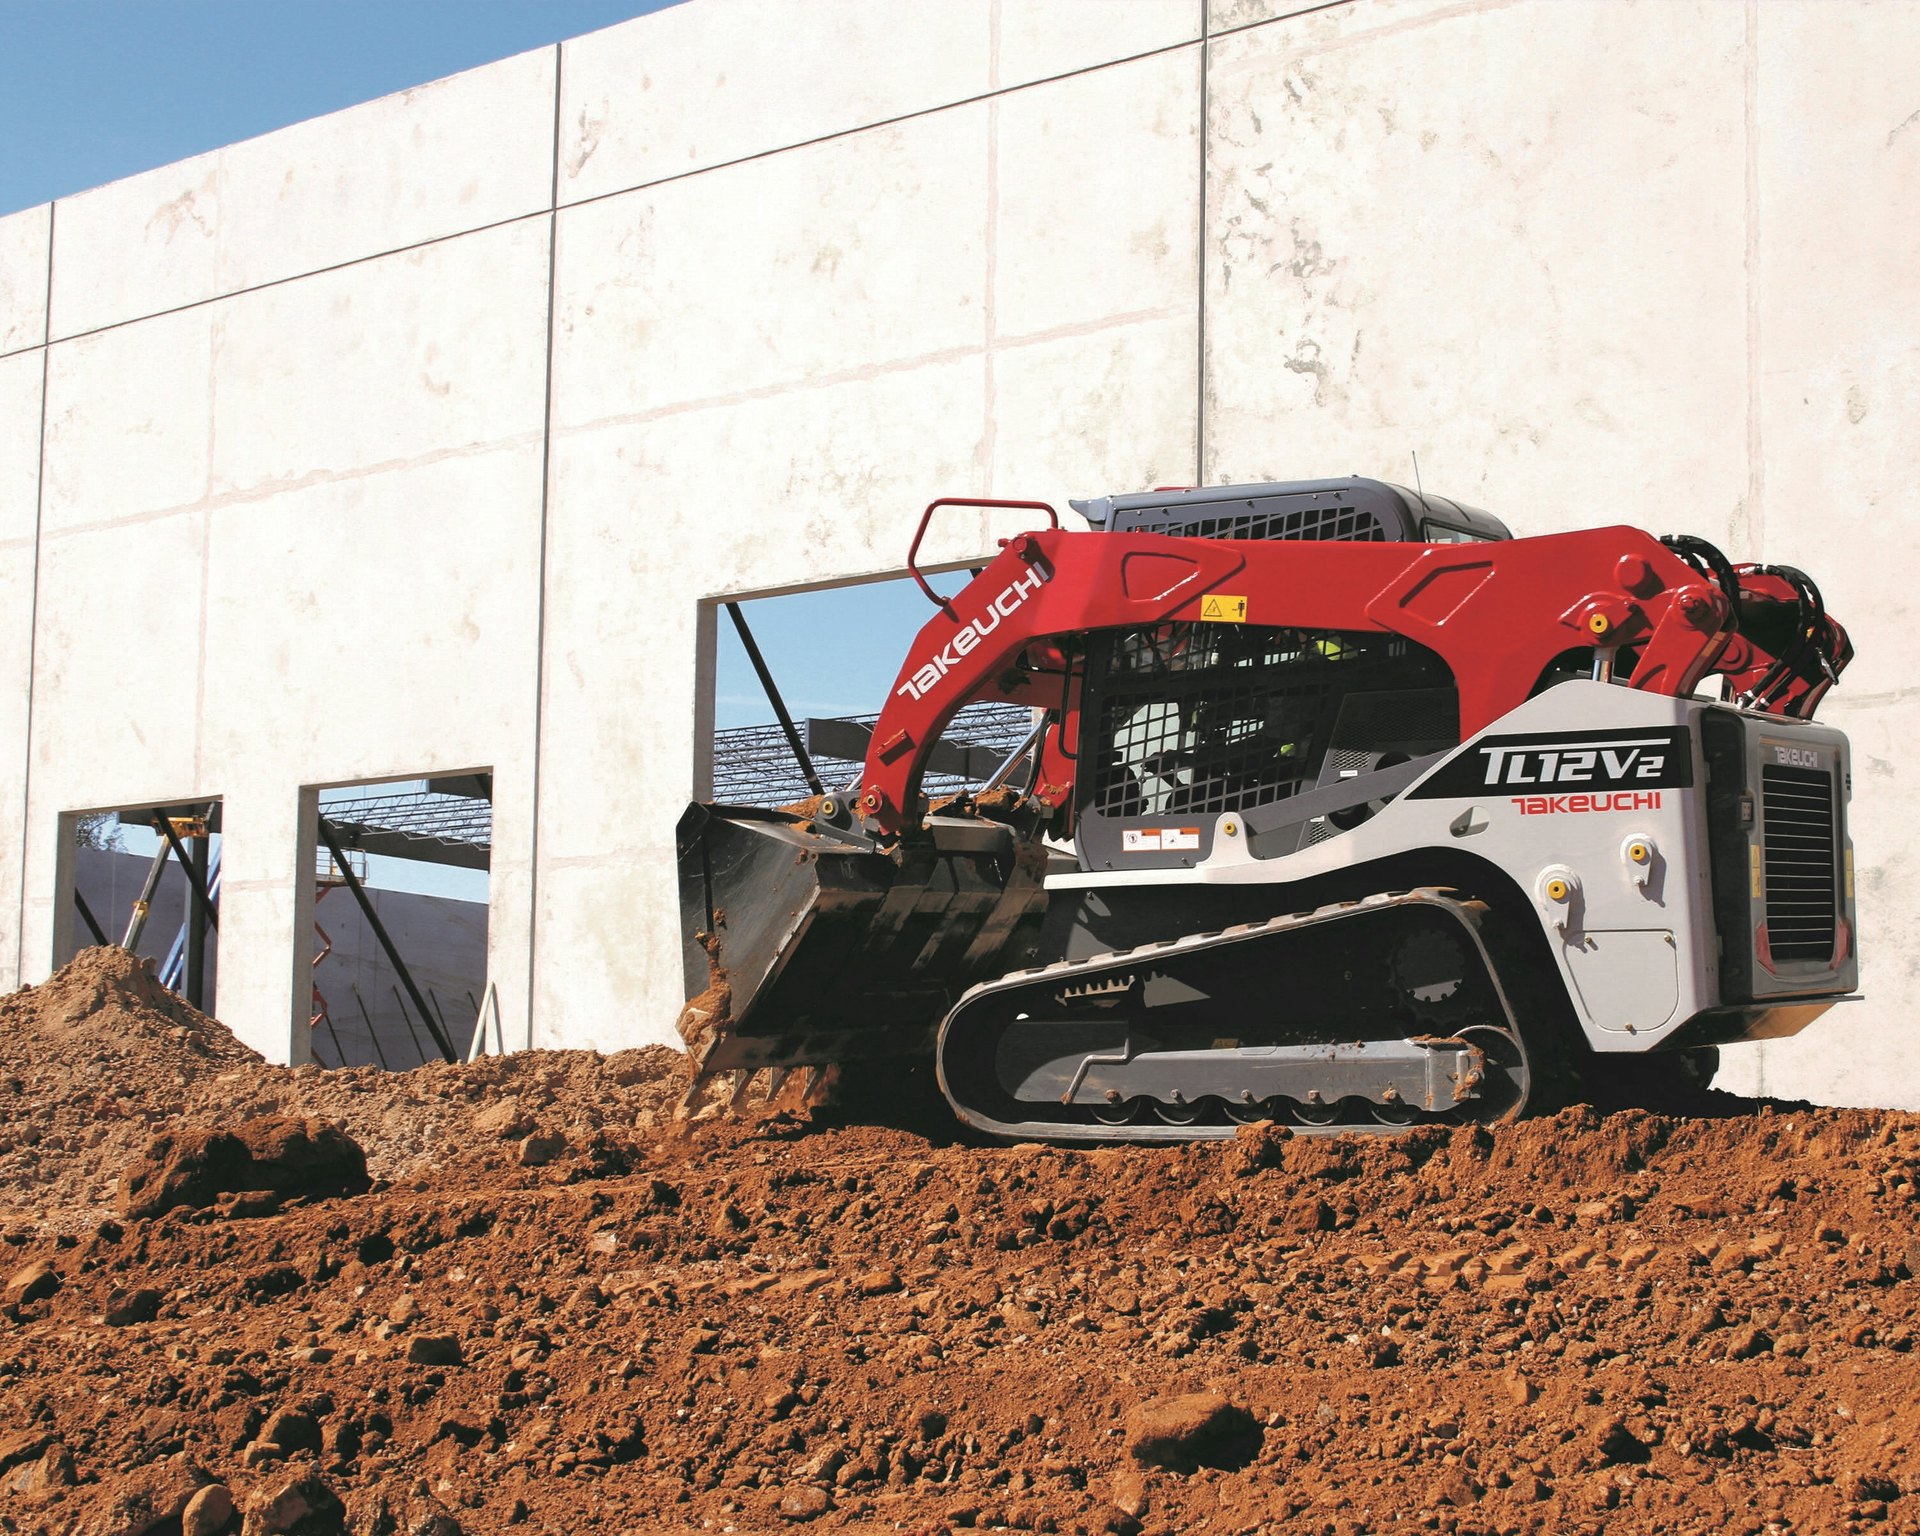 Takeuchi-US Introduces Largest Vertical Lift Compact Track Loader 